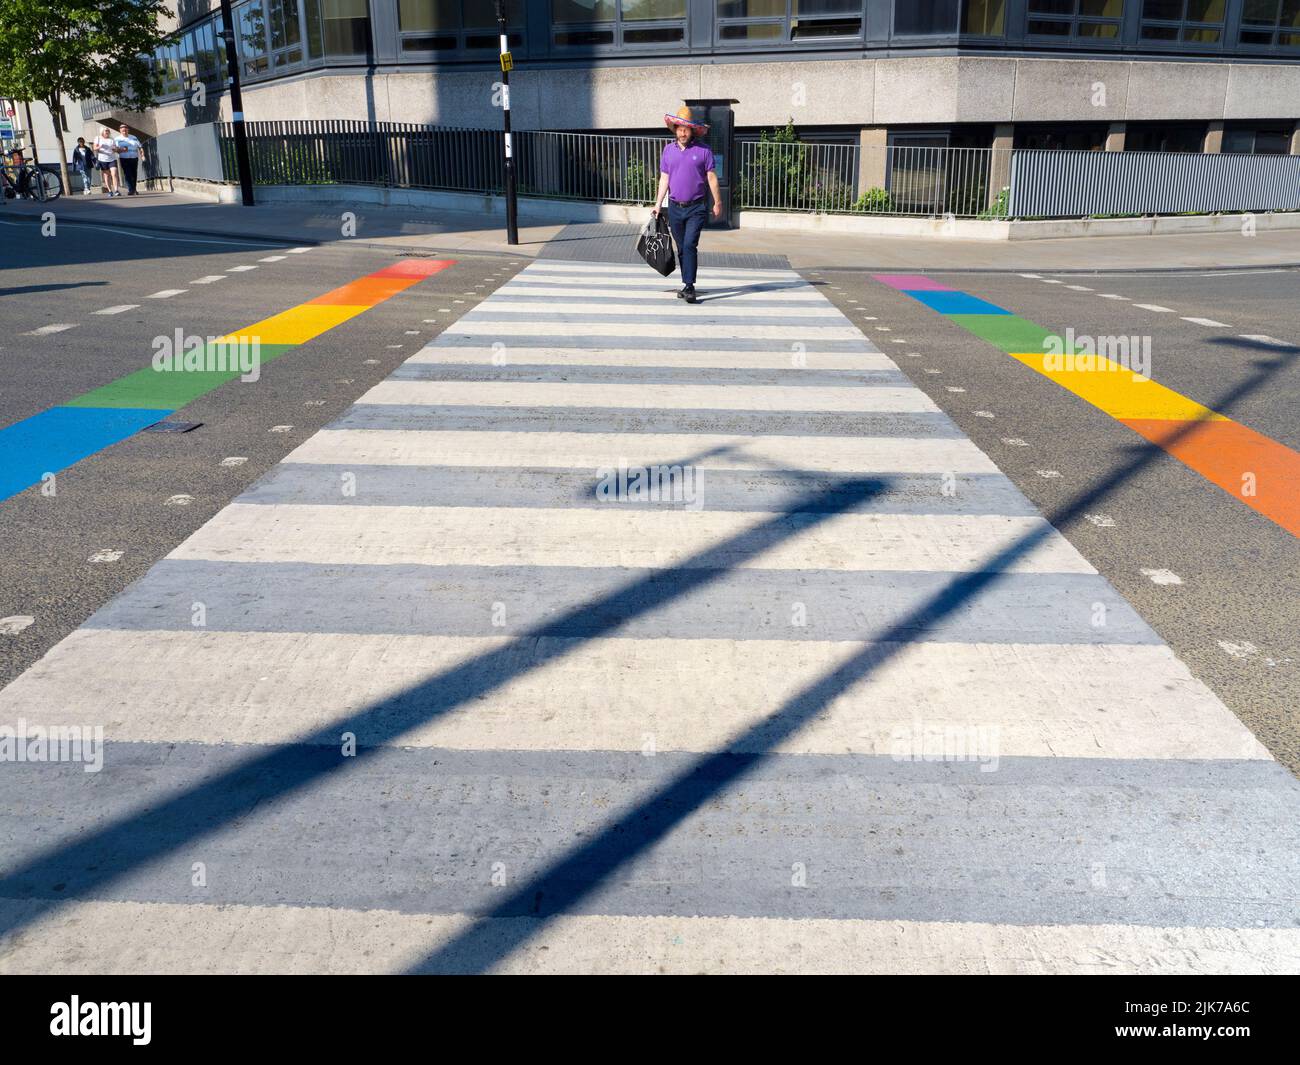 As part of the ongoing Oxford Pride 2022 events, various locations around the city receive rainbow makeovers - like this pedestrian crossing at the ju Stock Photo